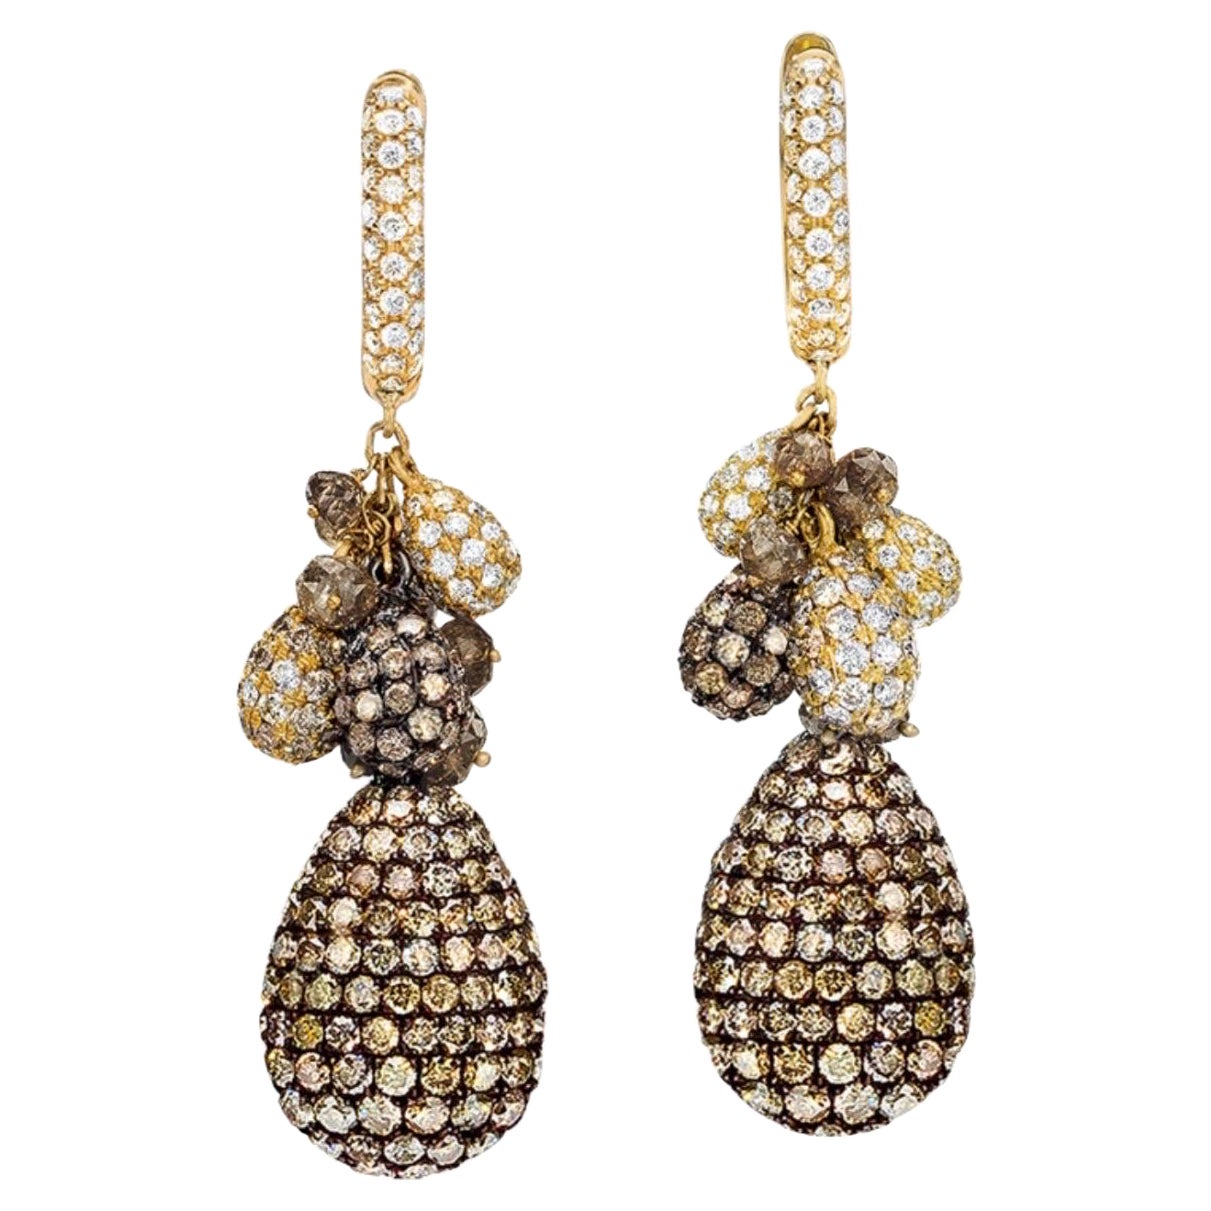 Mariani 18KT YG Drop Earrings with Brown 4.44Cts and White Diamonds 1.89 Cts. For Sale